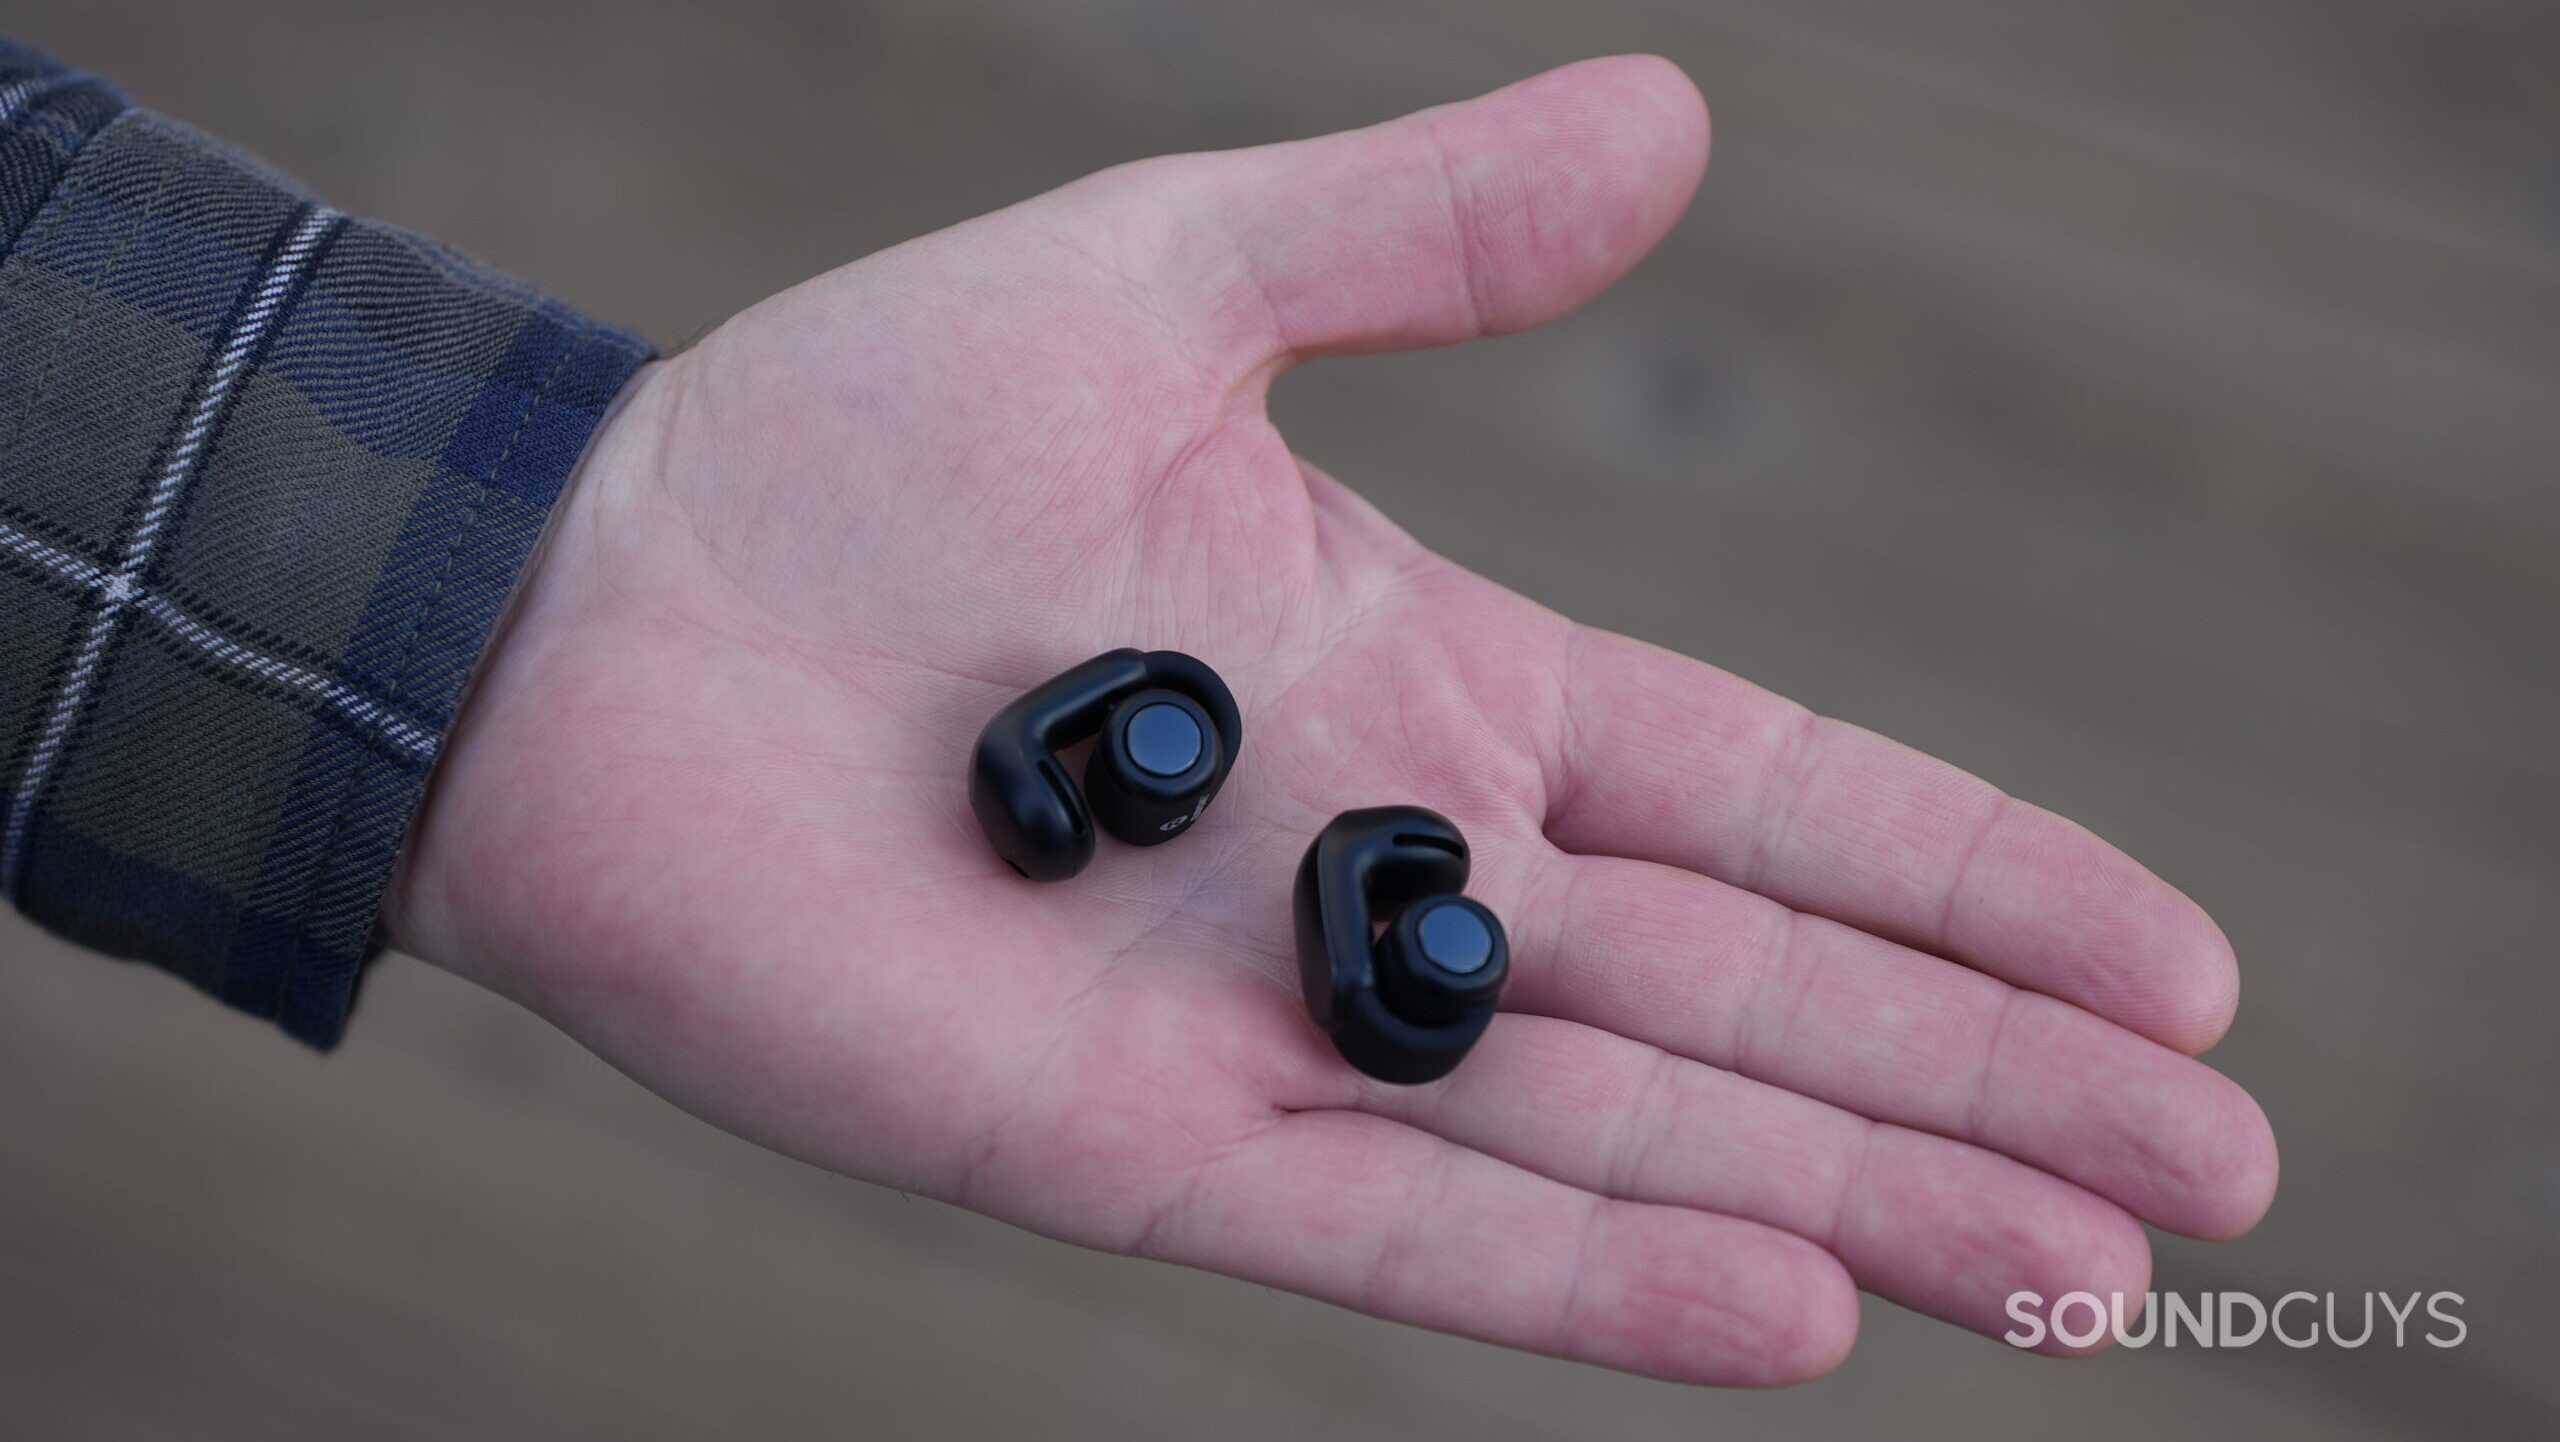 A photo of the Bose Ultimate Open Earbuds resting on an open hand